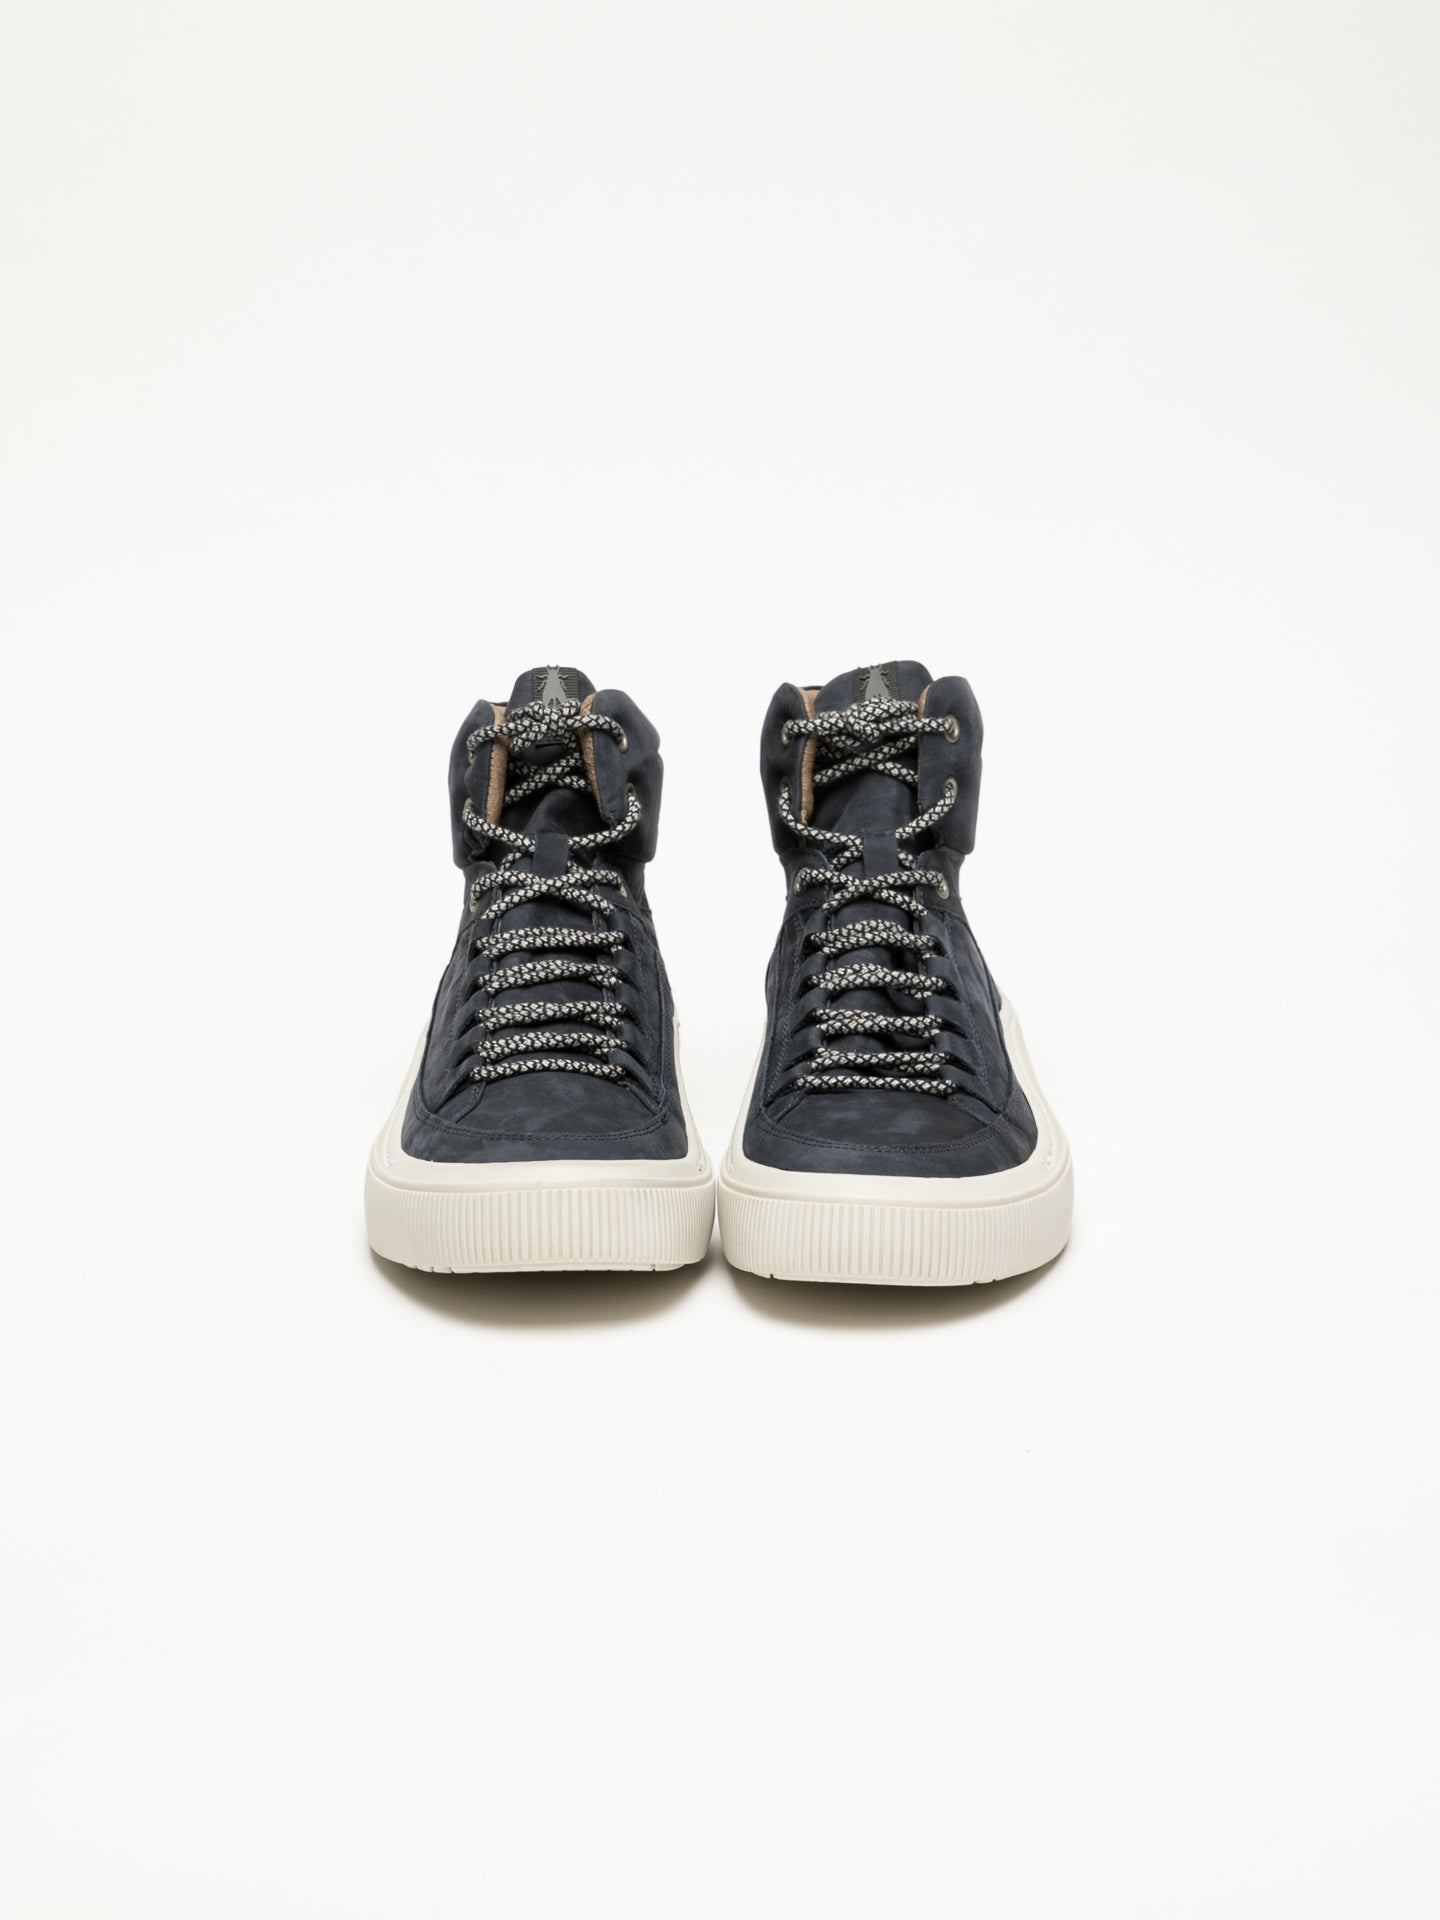 Fly London Navy Hi-Top Trainers